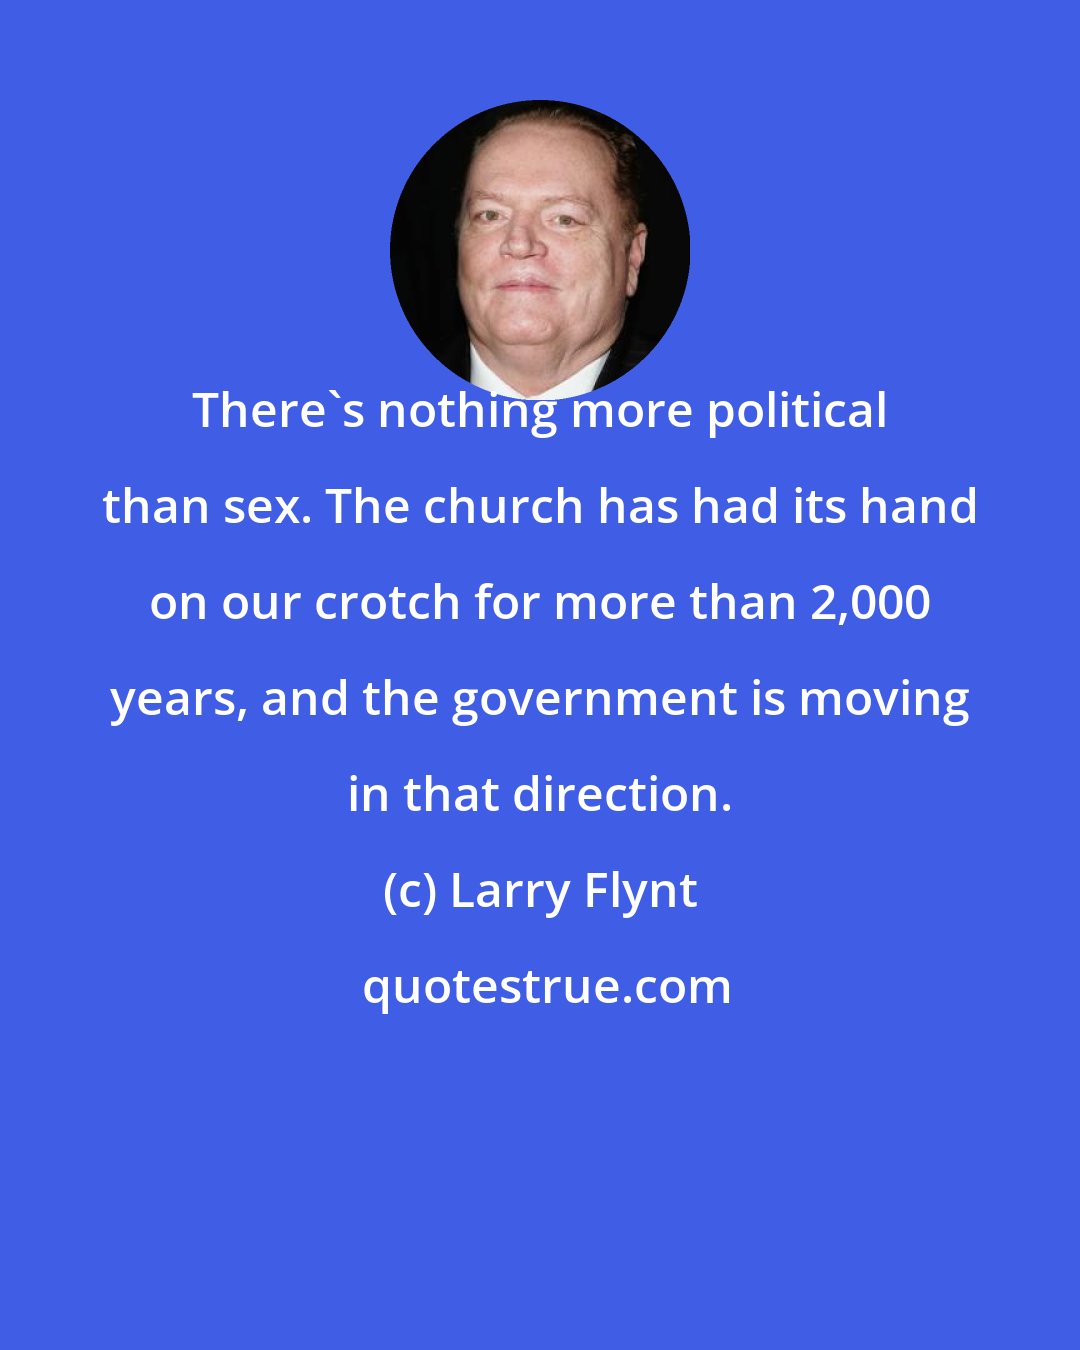 Larry Flynt: There's nothing more political than sex. The church has had its hand on our crotch for more than 2,000 years, and the government is moving in that direction.